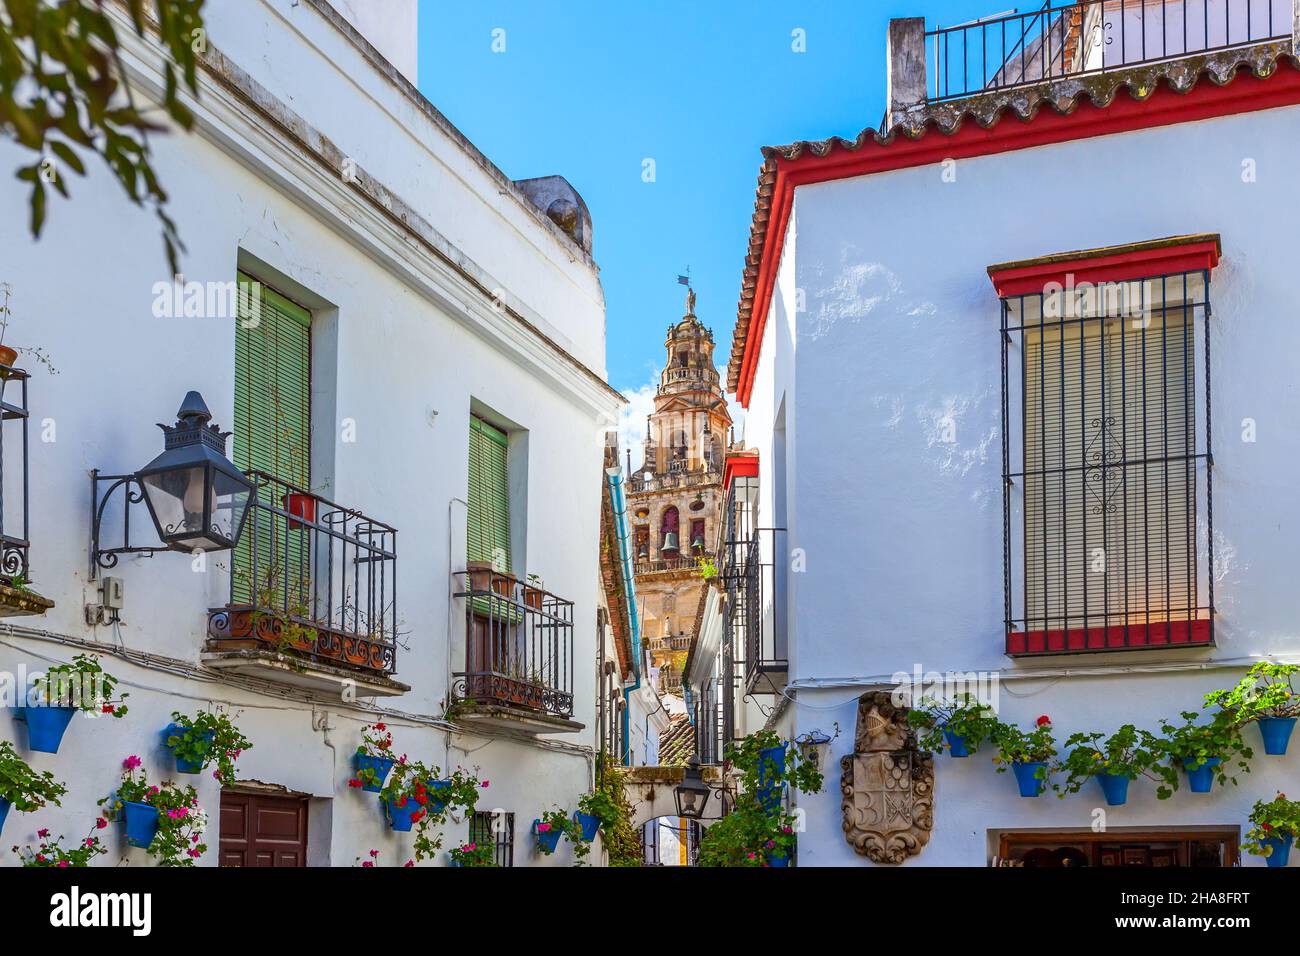 Flower Street in the Old town of Cordoba, Spain Stock Photo